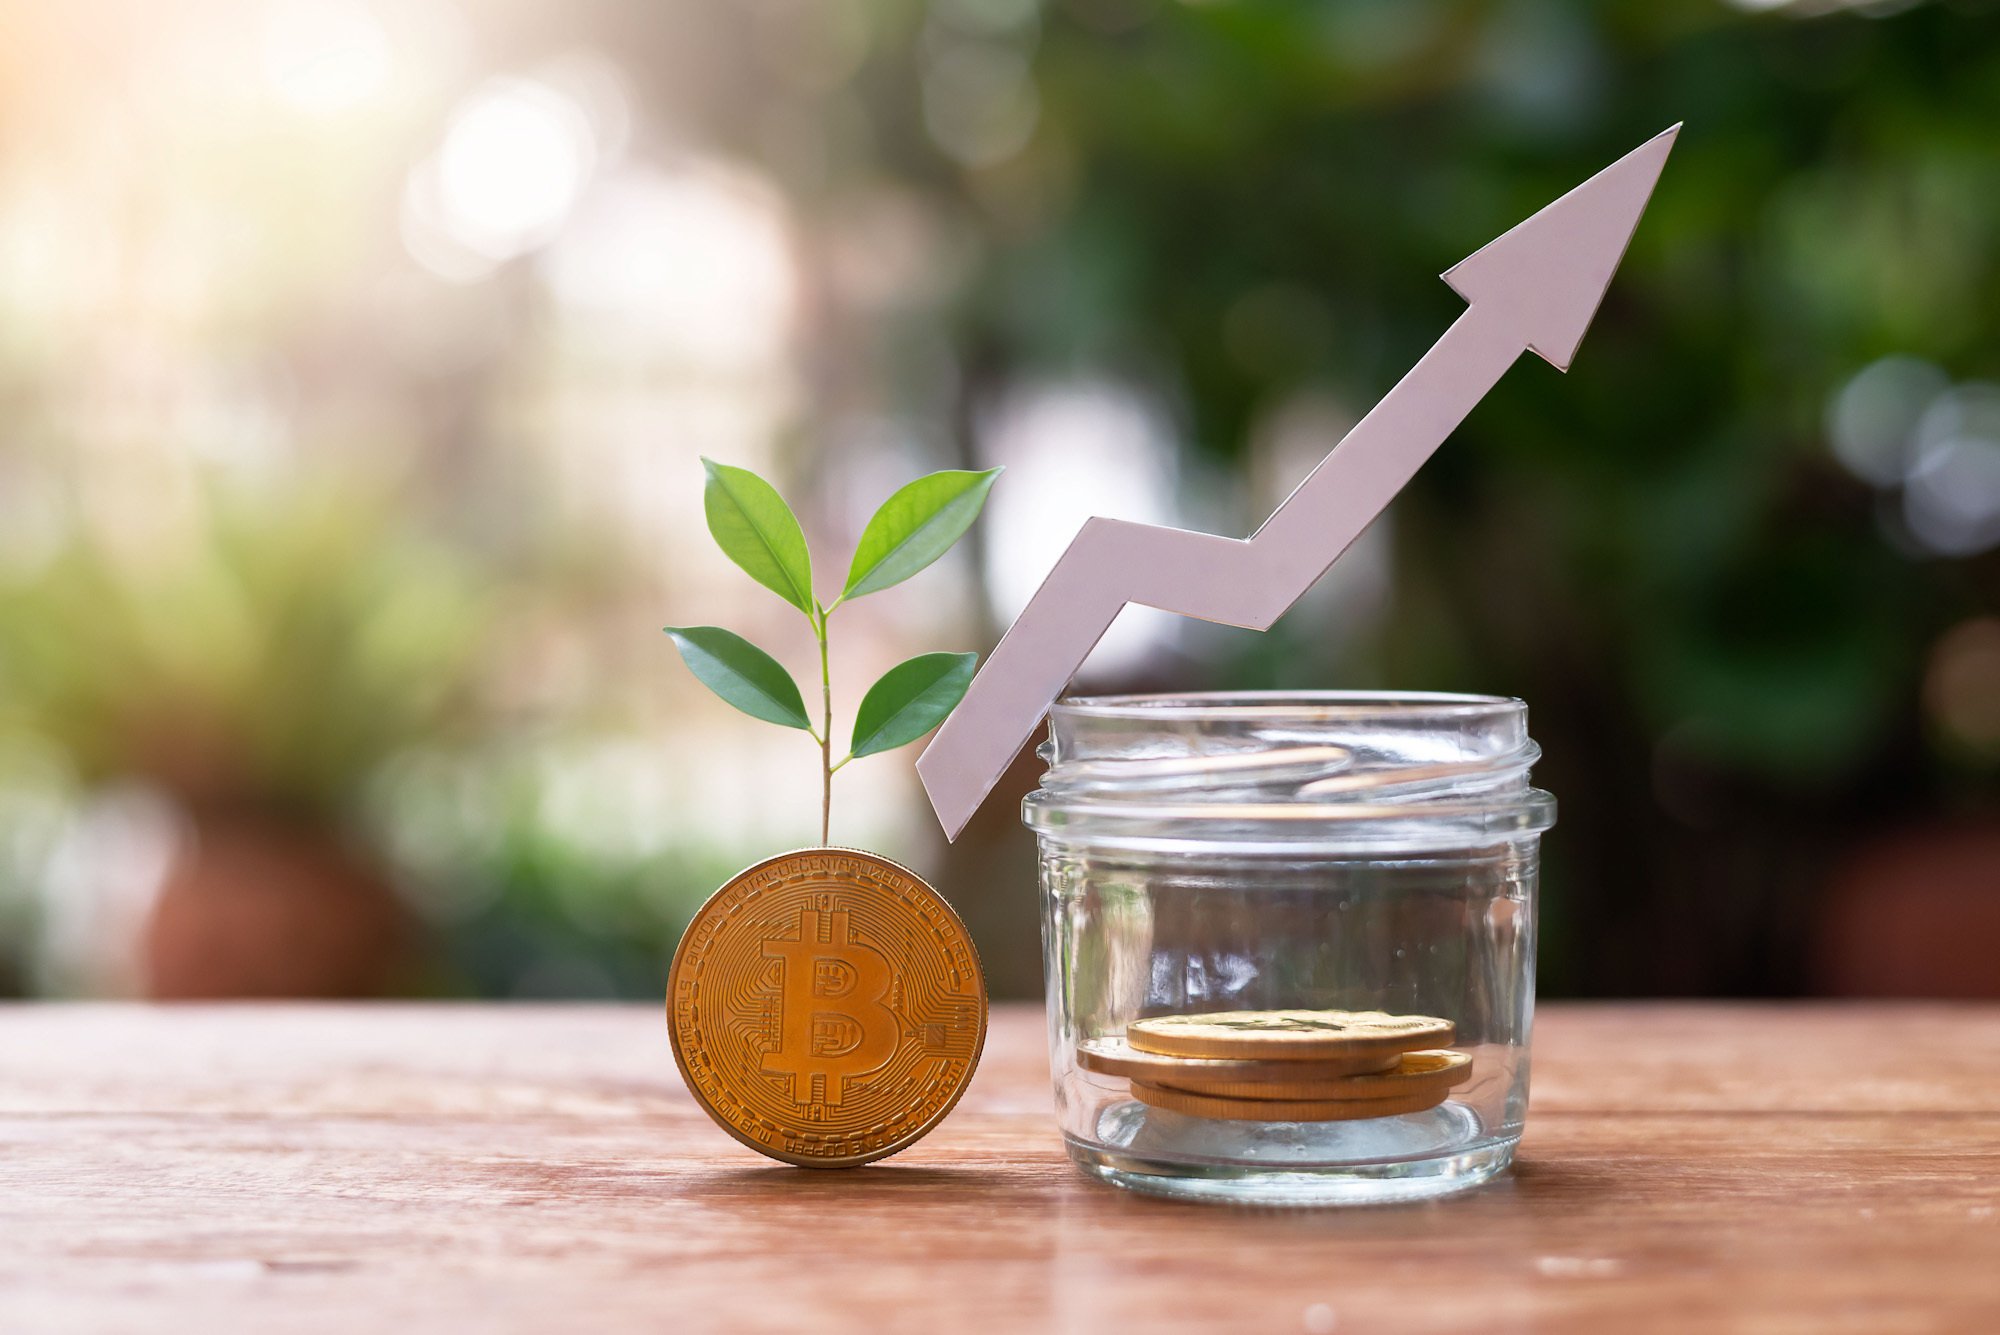 A Bitcoin with a small plant growing out of it next to a cup of water. A chart graphic implying positive growth is above the Bitcoin and cup.